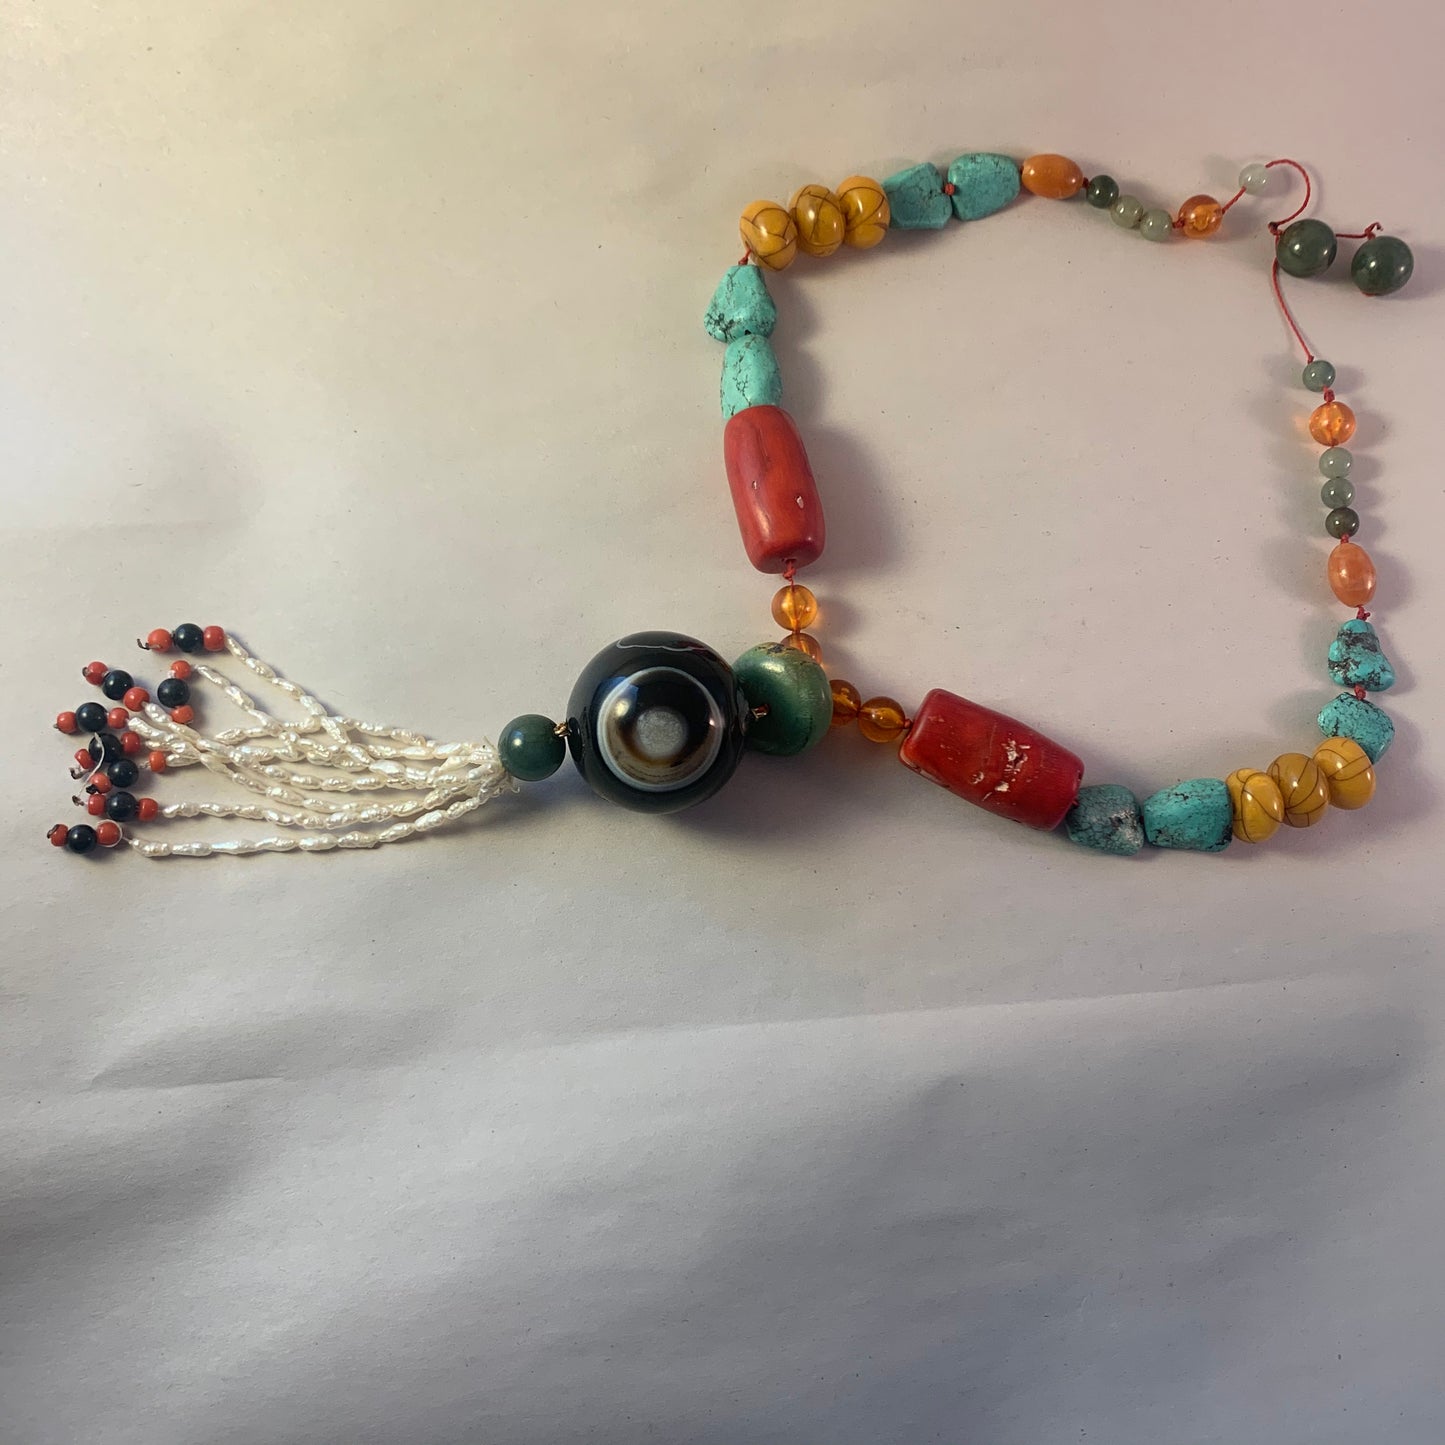 A boho necklace with vintage beads